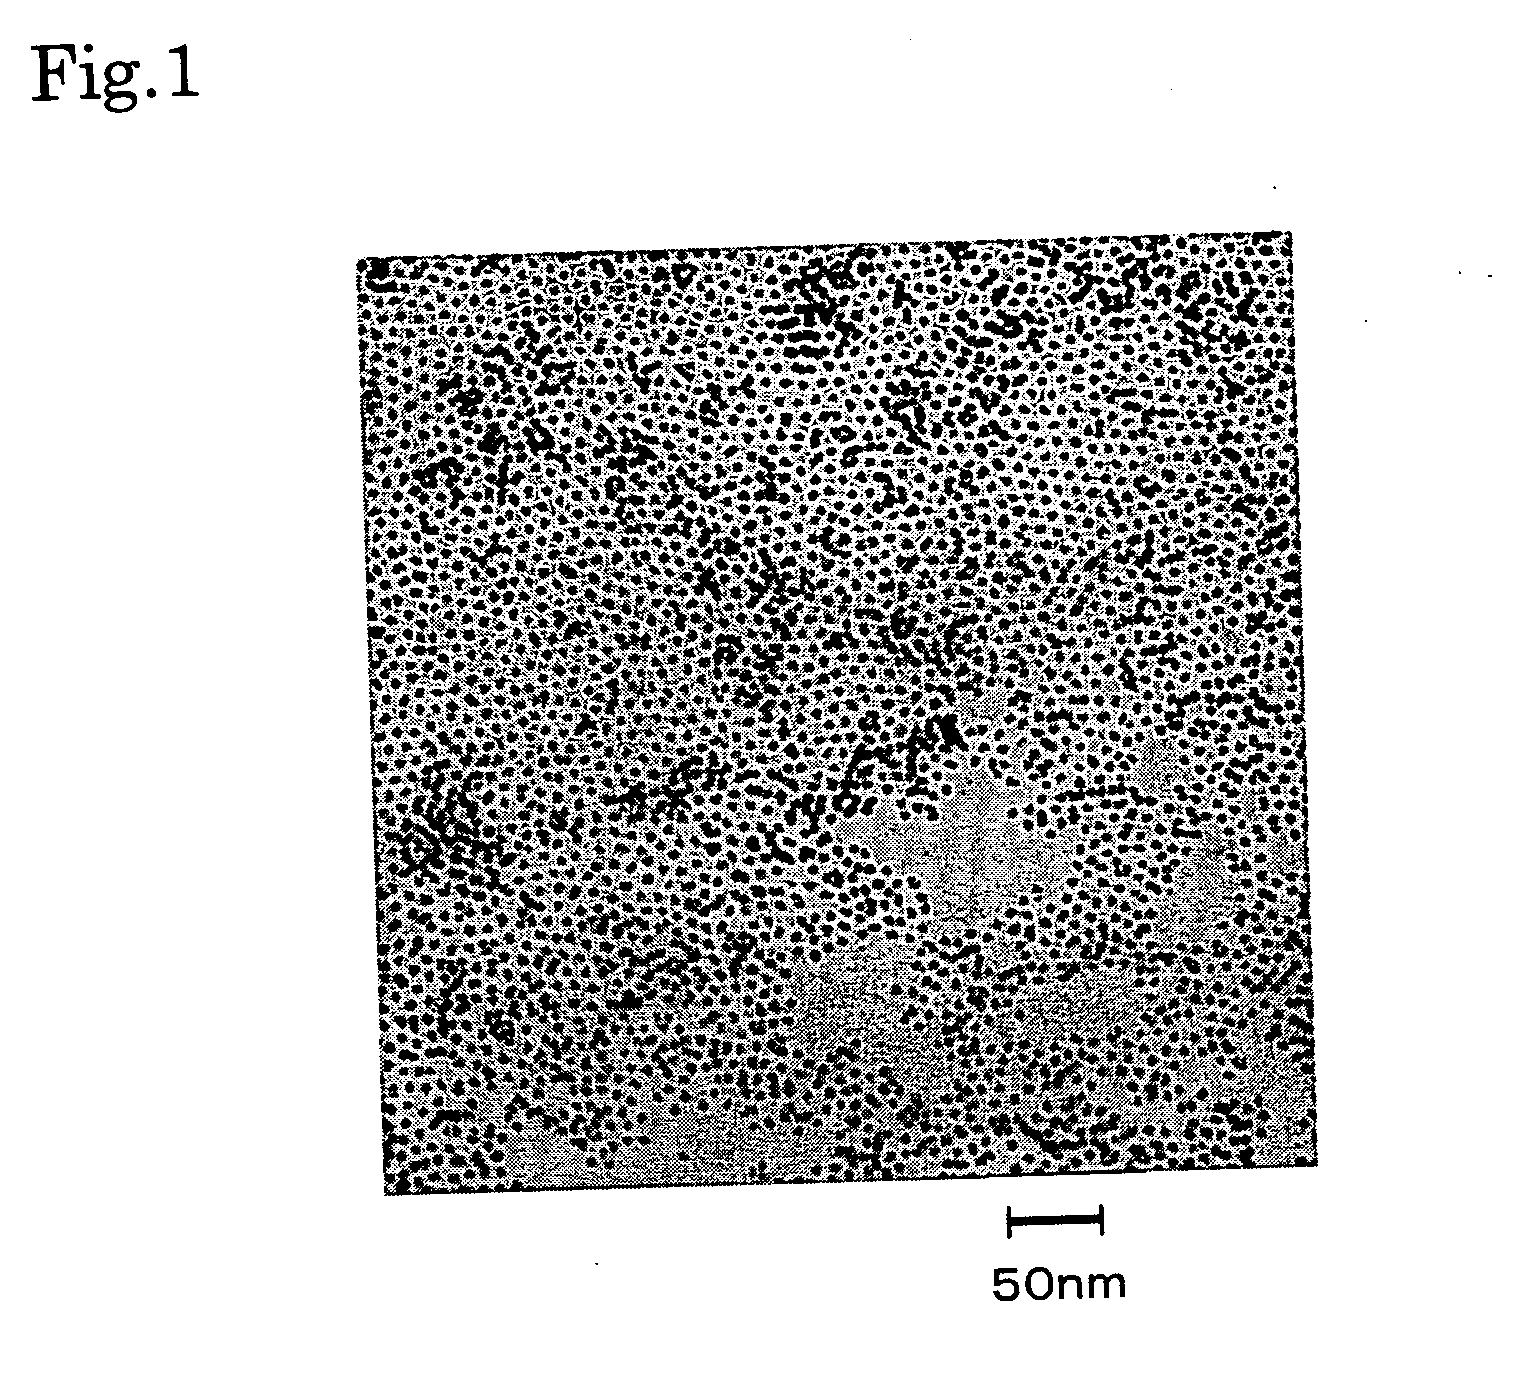 Method for extracting magnetically hard alloy nanoparticles and magnetic recording material